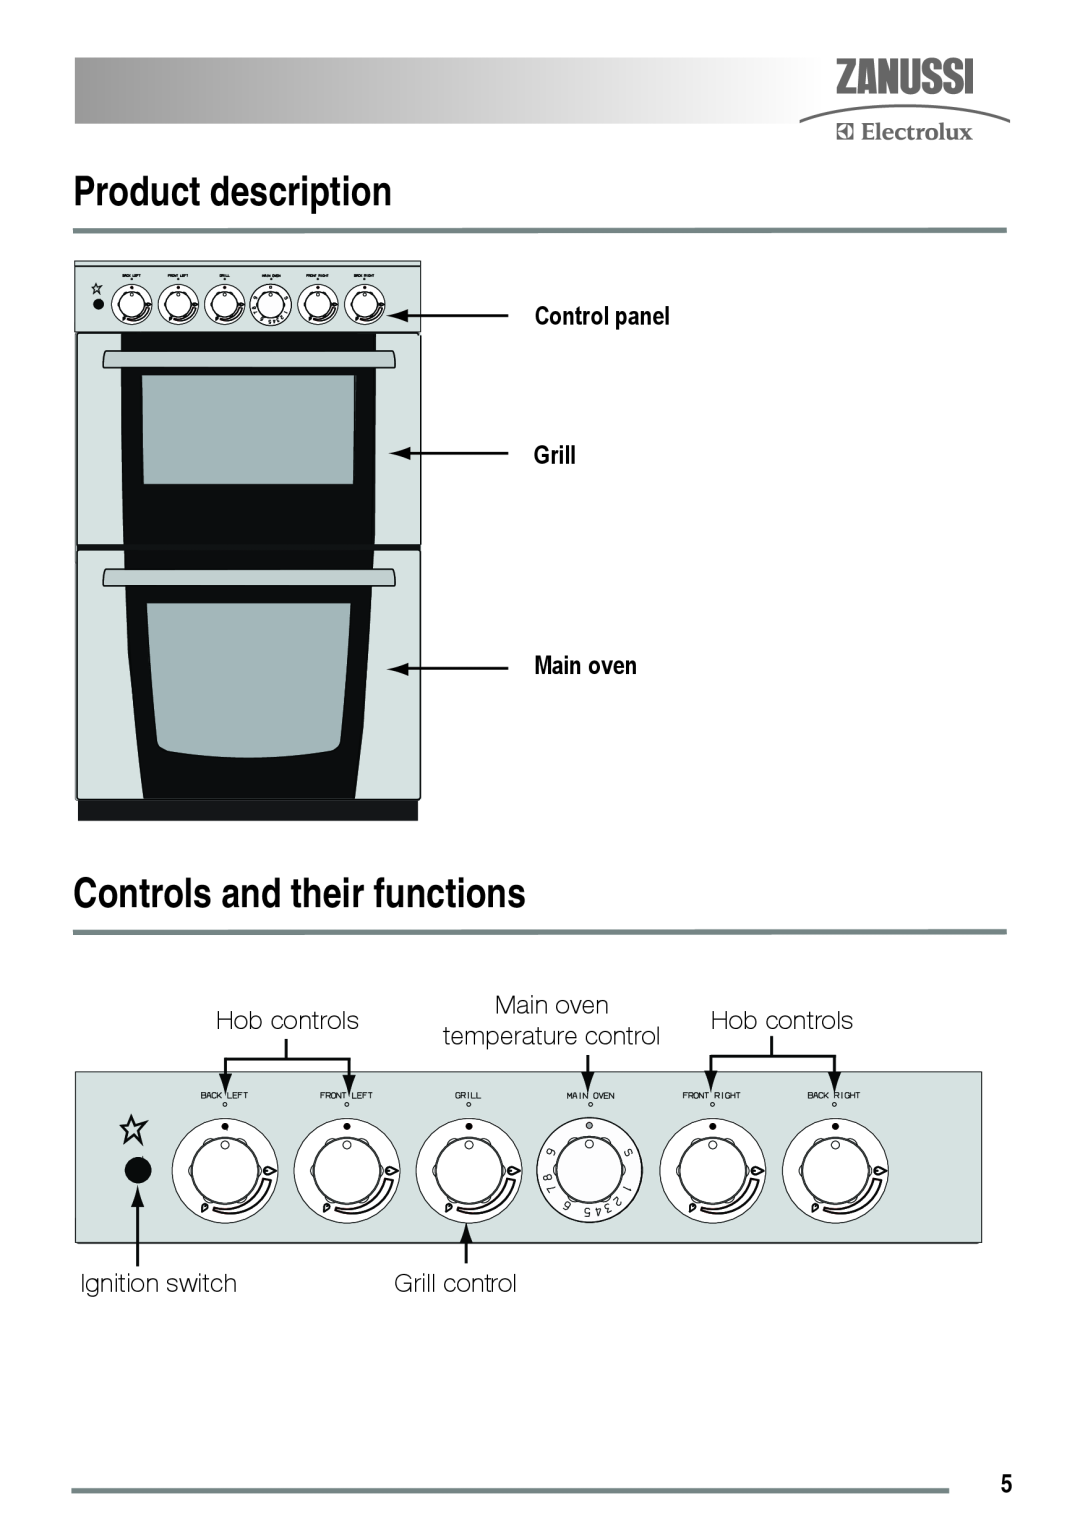 Zanussi ZKG5020 manual Product description, Controls and their functions, Control panel Grill Main oven, Hob controls 